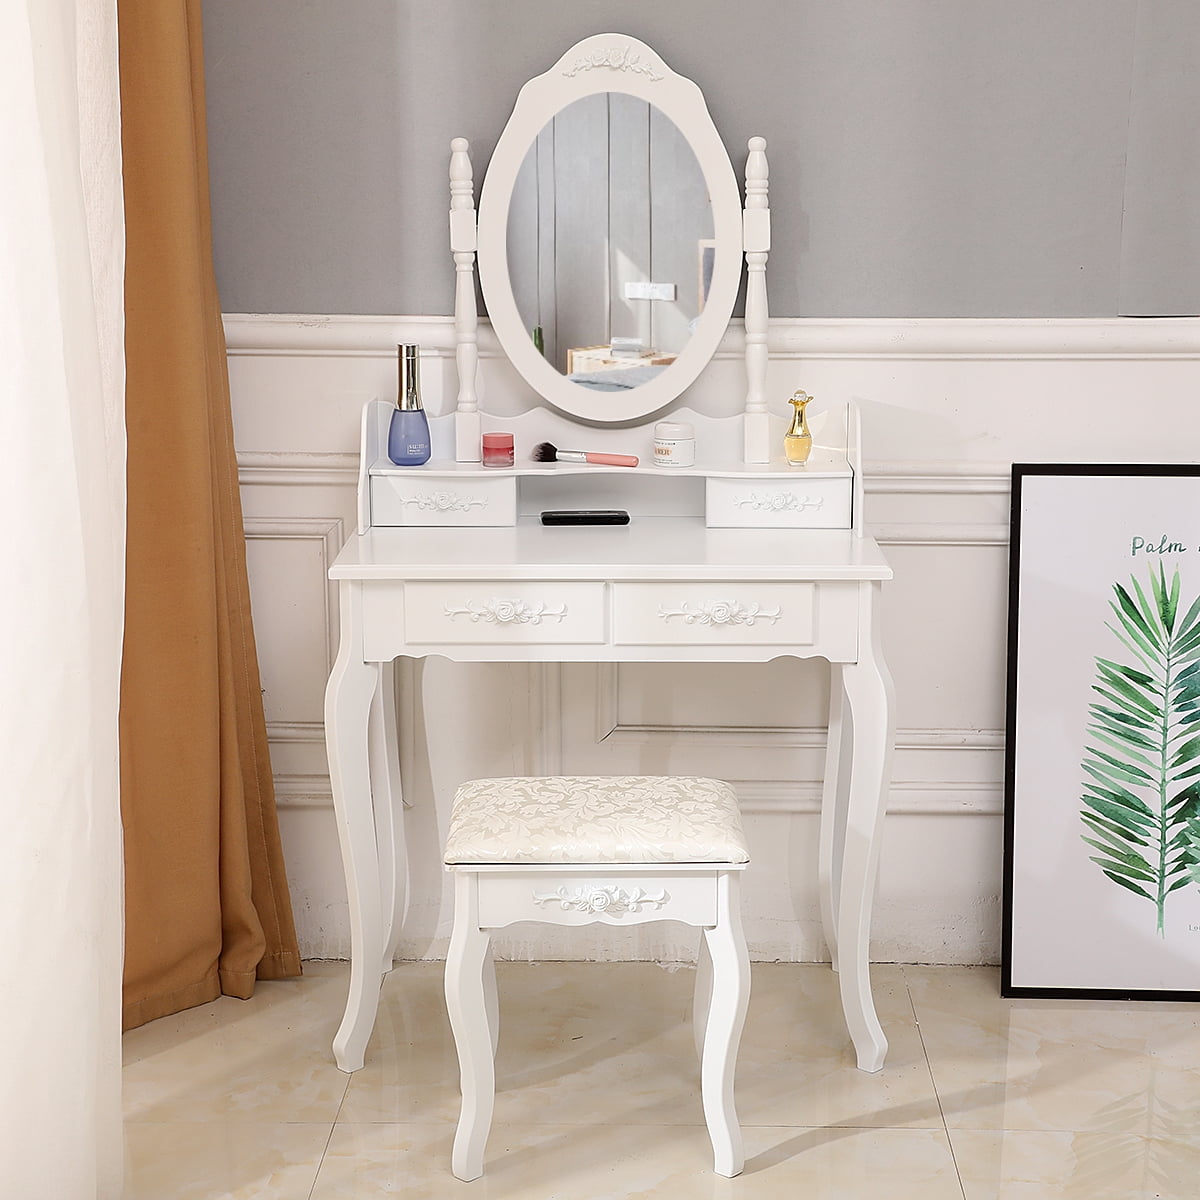 Details about   White Vanity Makeup Dressing Table Set w/Stool 4 Drawer&Mirror Jewelry Wood Desk 